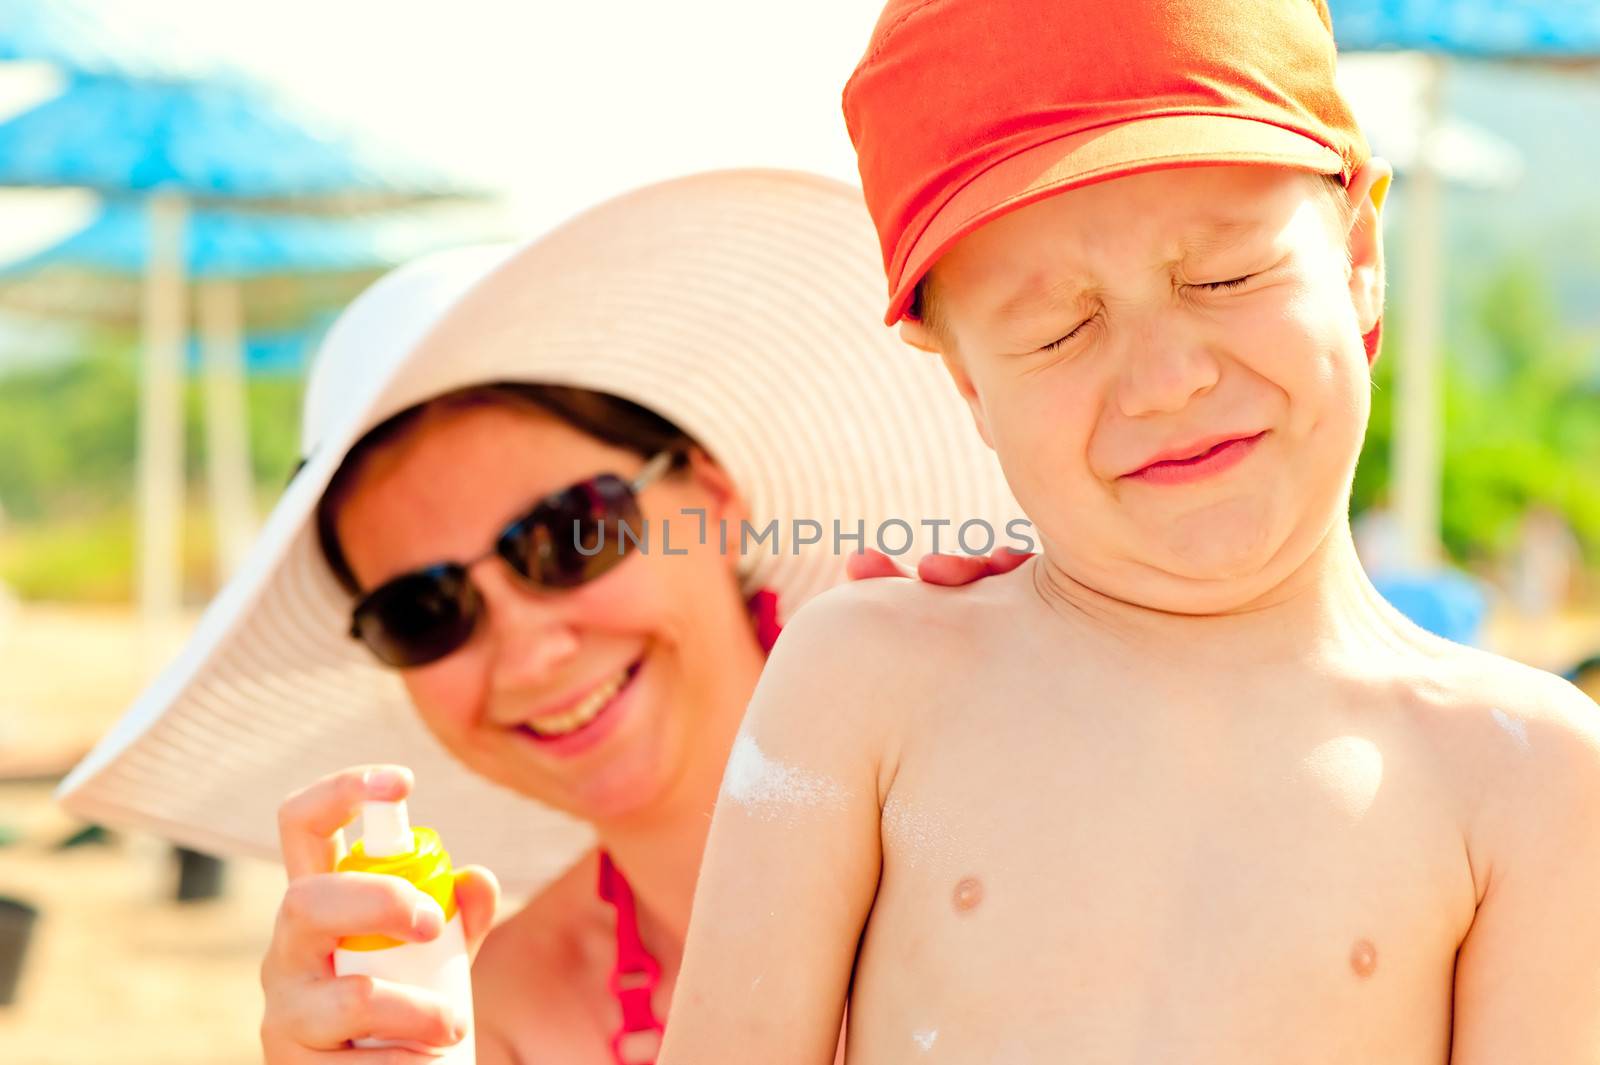 Mom puts on the baby's skin lotion for sun protection by kosmsos111